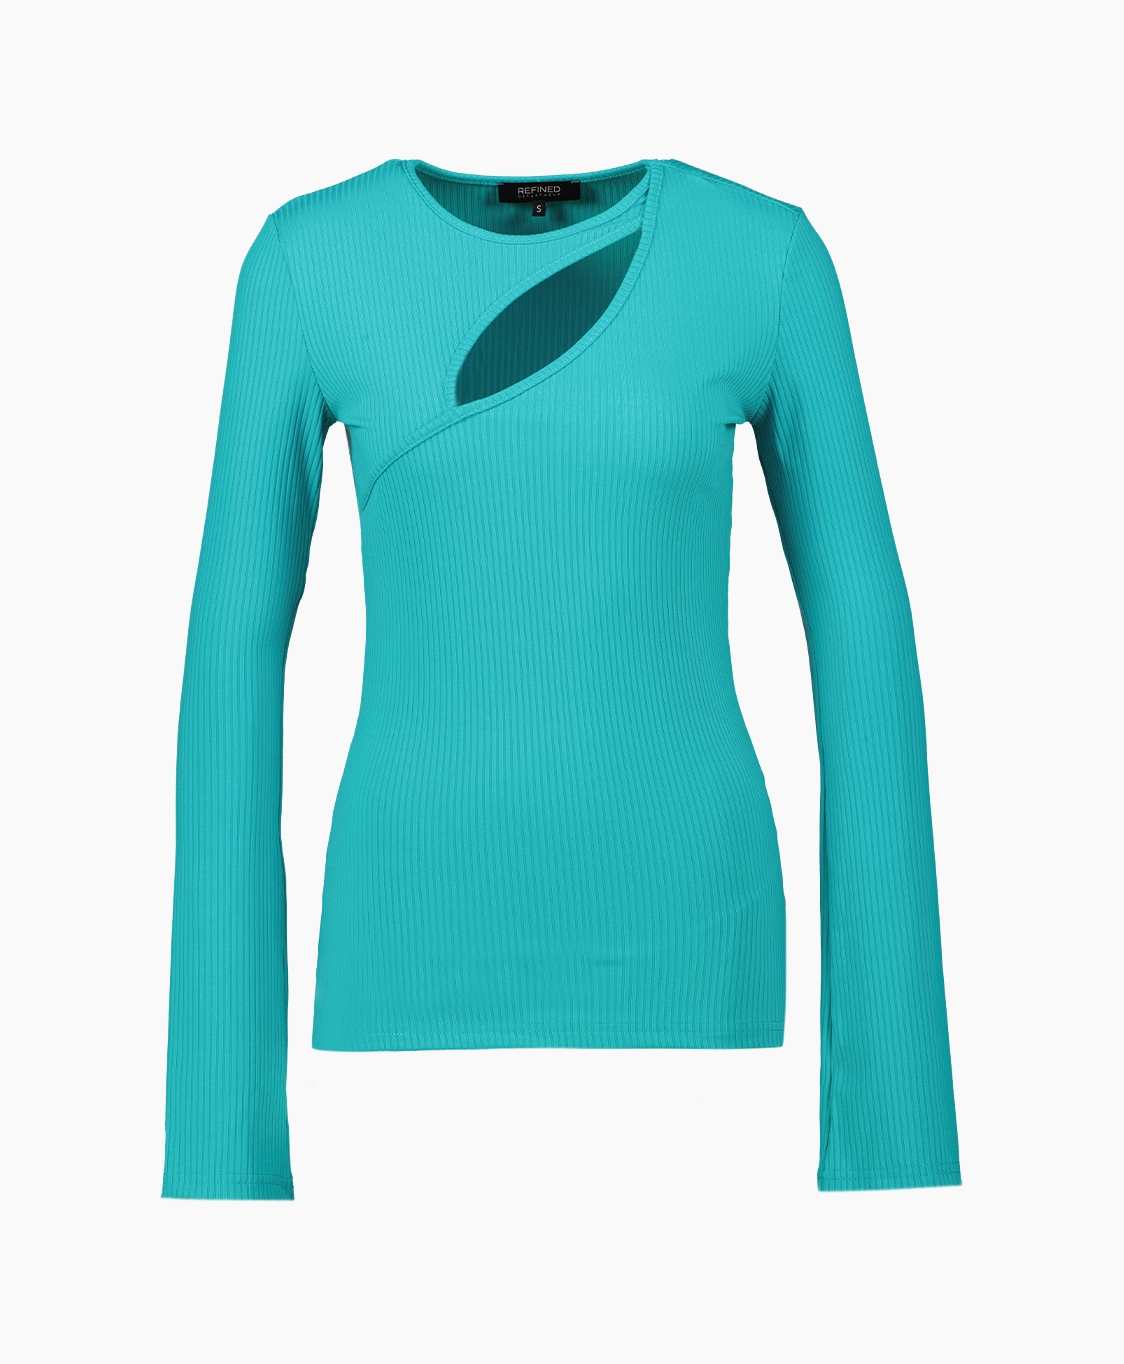 Refined Department T-shirt Selicia turquoise